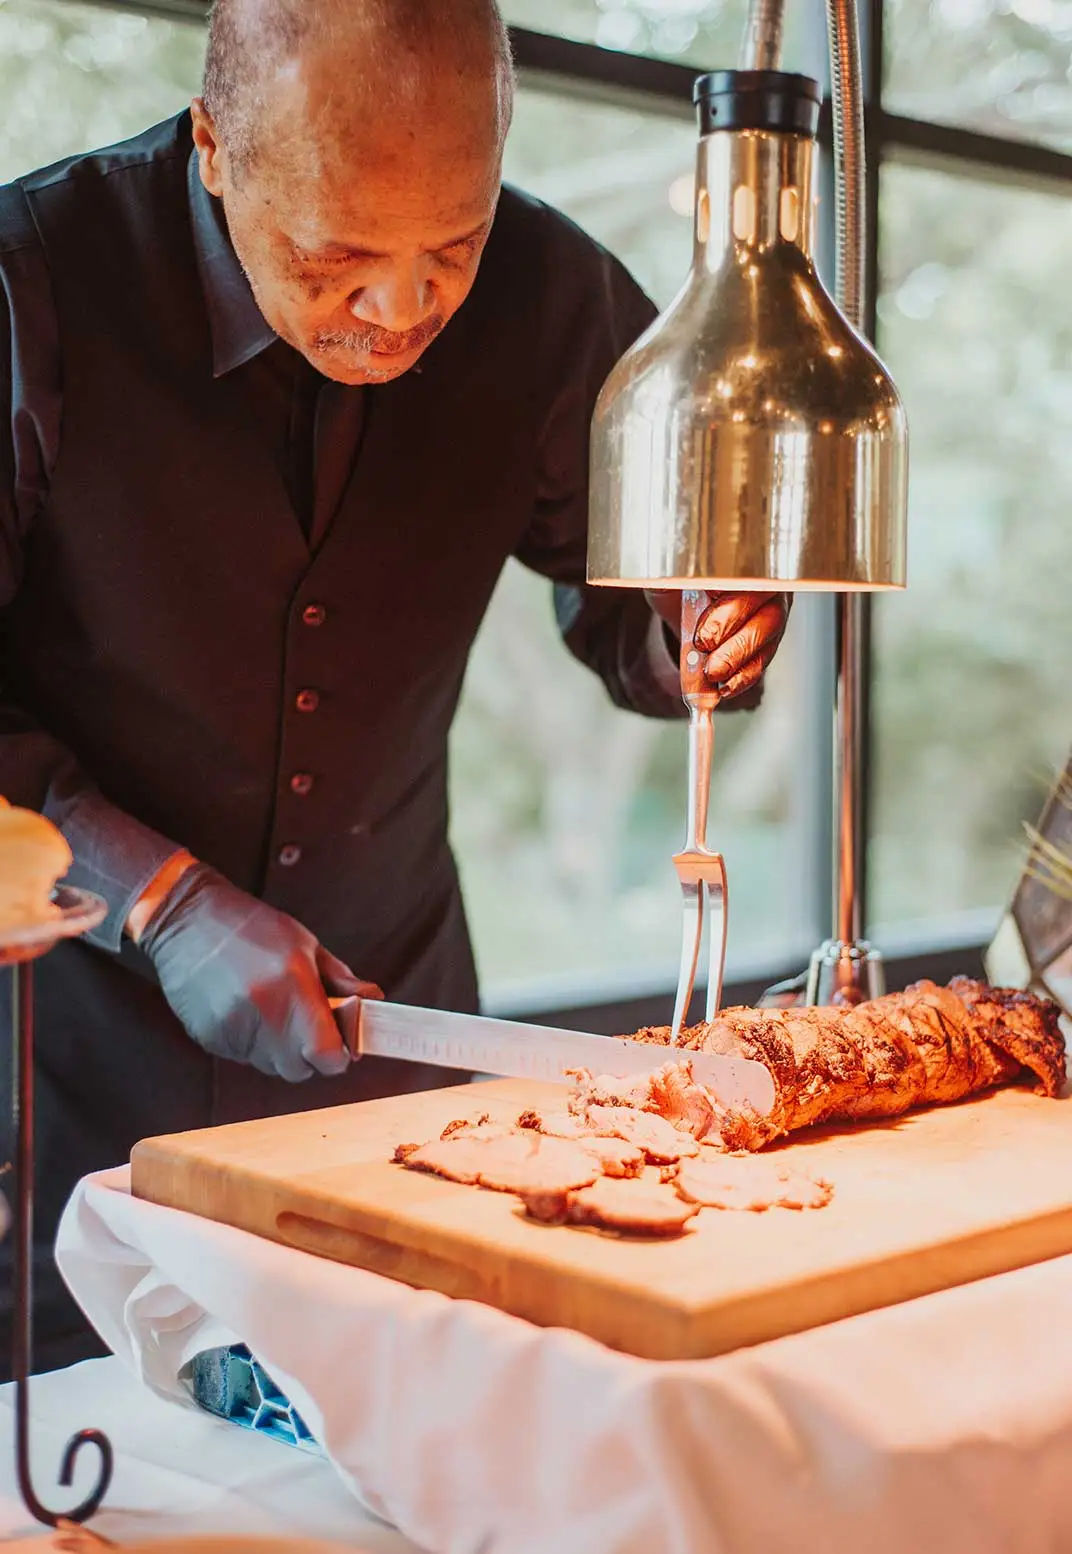 Chef slicing roasted meat at event